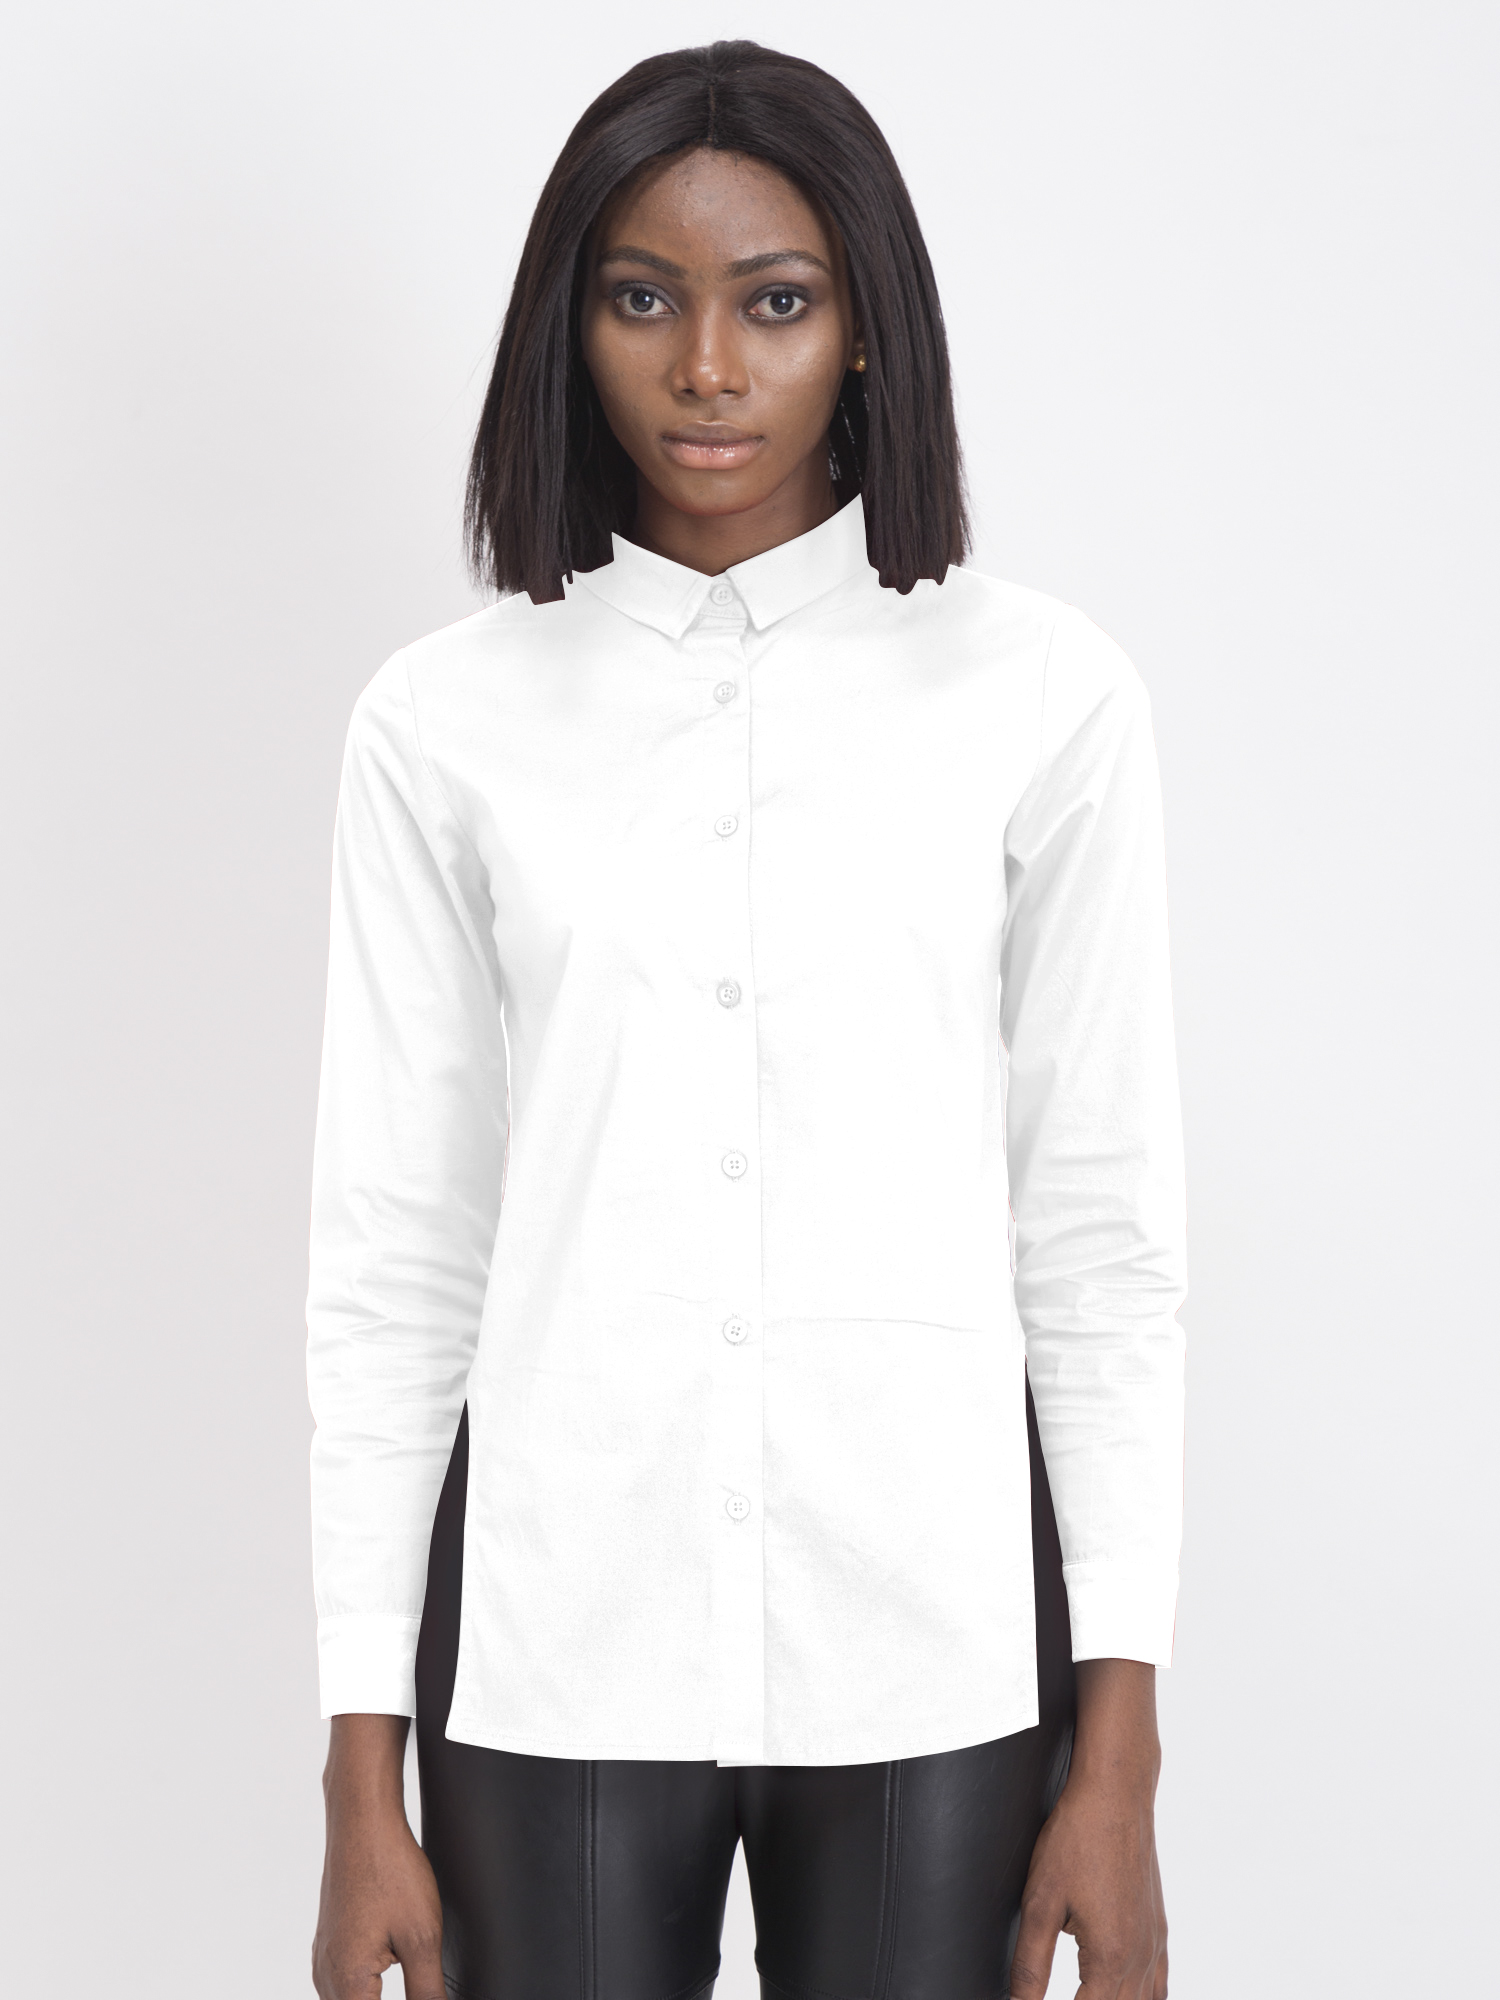 Slit Straight Top White - Front